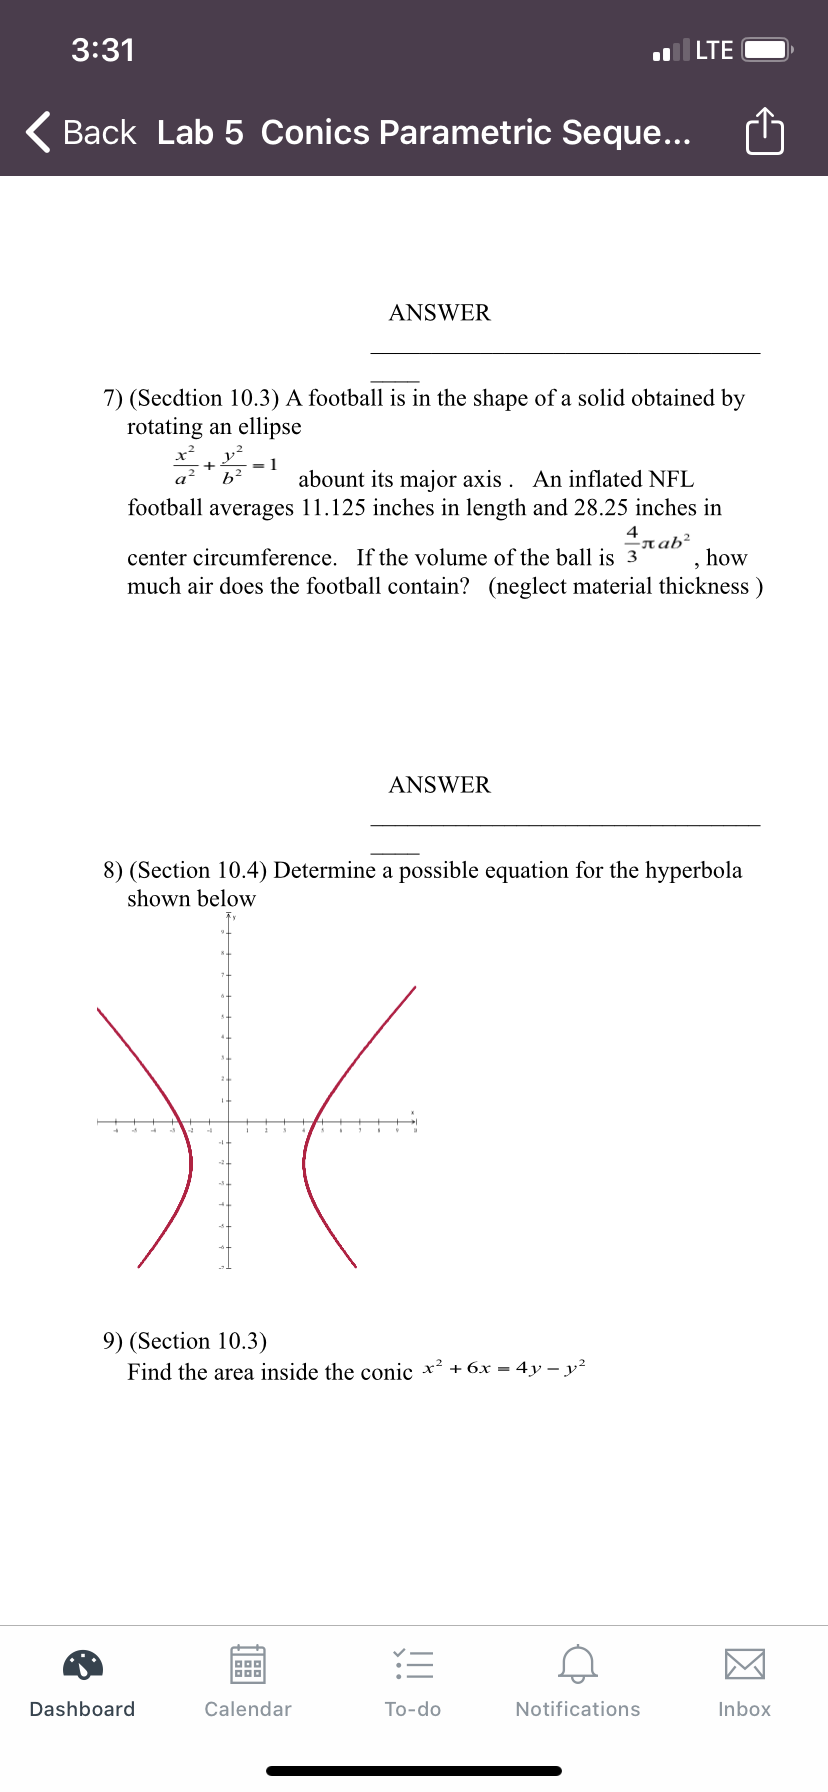 7) (Secdtion 10.3) A football is in the shape of a solid obtained by
rotating an ellipse
abount its major axis . An inflated NFL
football averages 11.125 inches in length and 28.25 inches in
4gab²
how
much air does the football contain? (neglect material thickness)
center circumference. If the volume of the ball is 3
